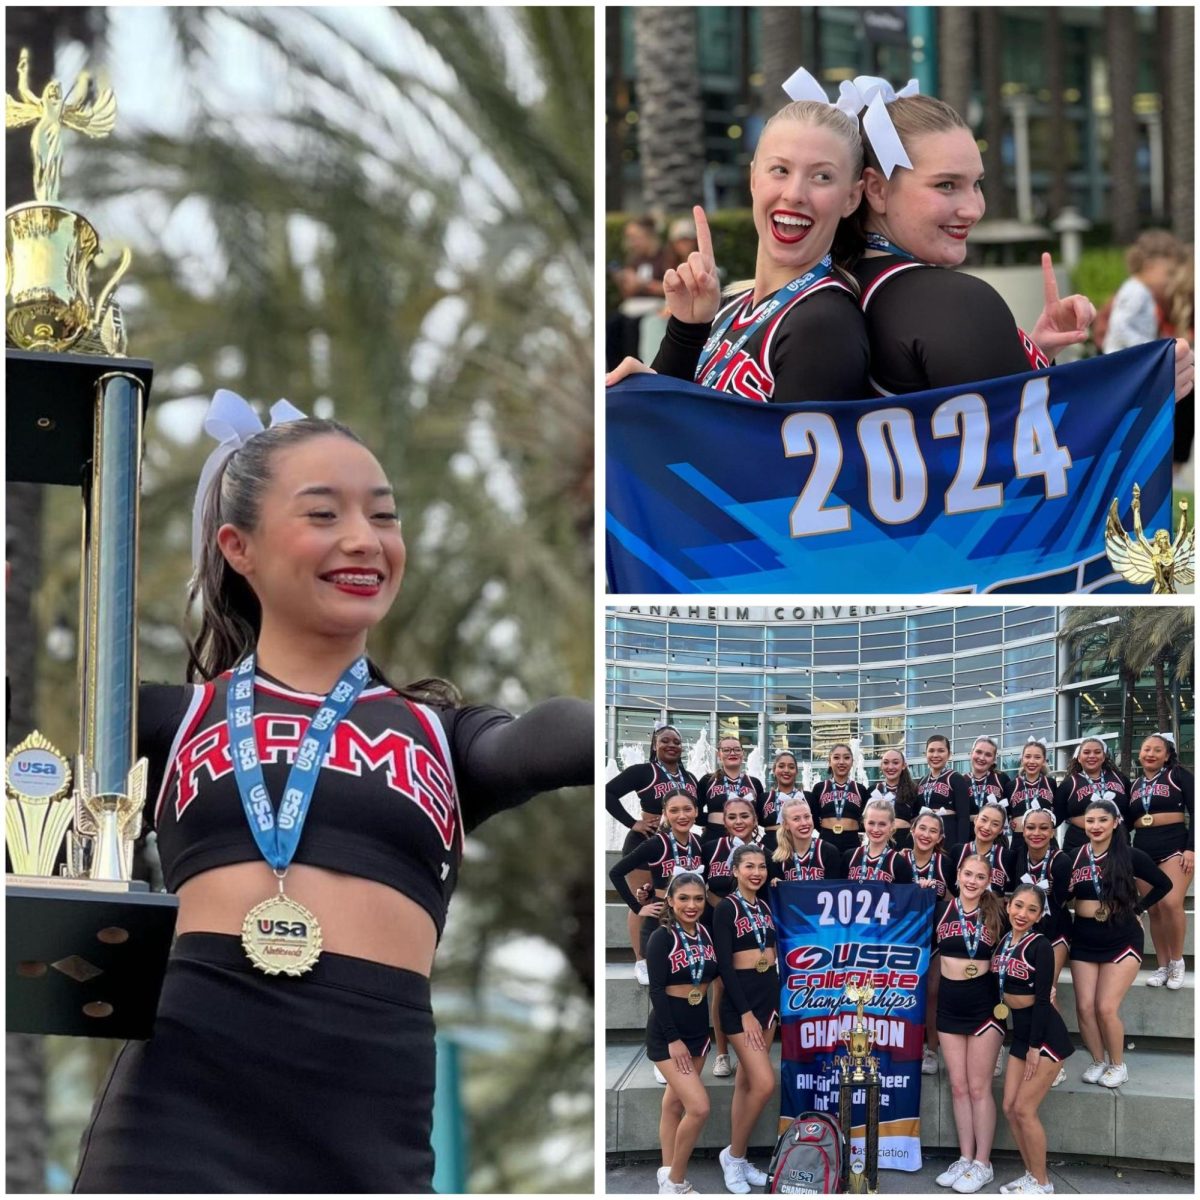 Fresno+City+College%E2%80%99s+cheer+team+celebrating+their+win+after+placing+first+at+the+USA+Spirit+Association+Collegiate+Championships+taken+on+Feb.18